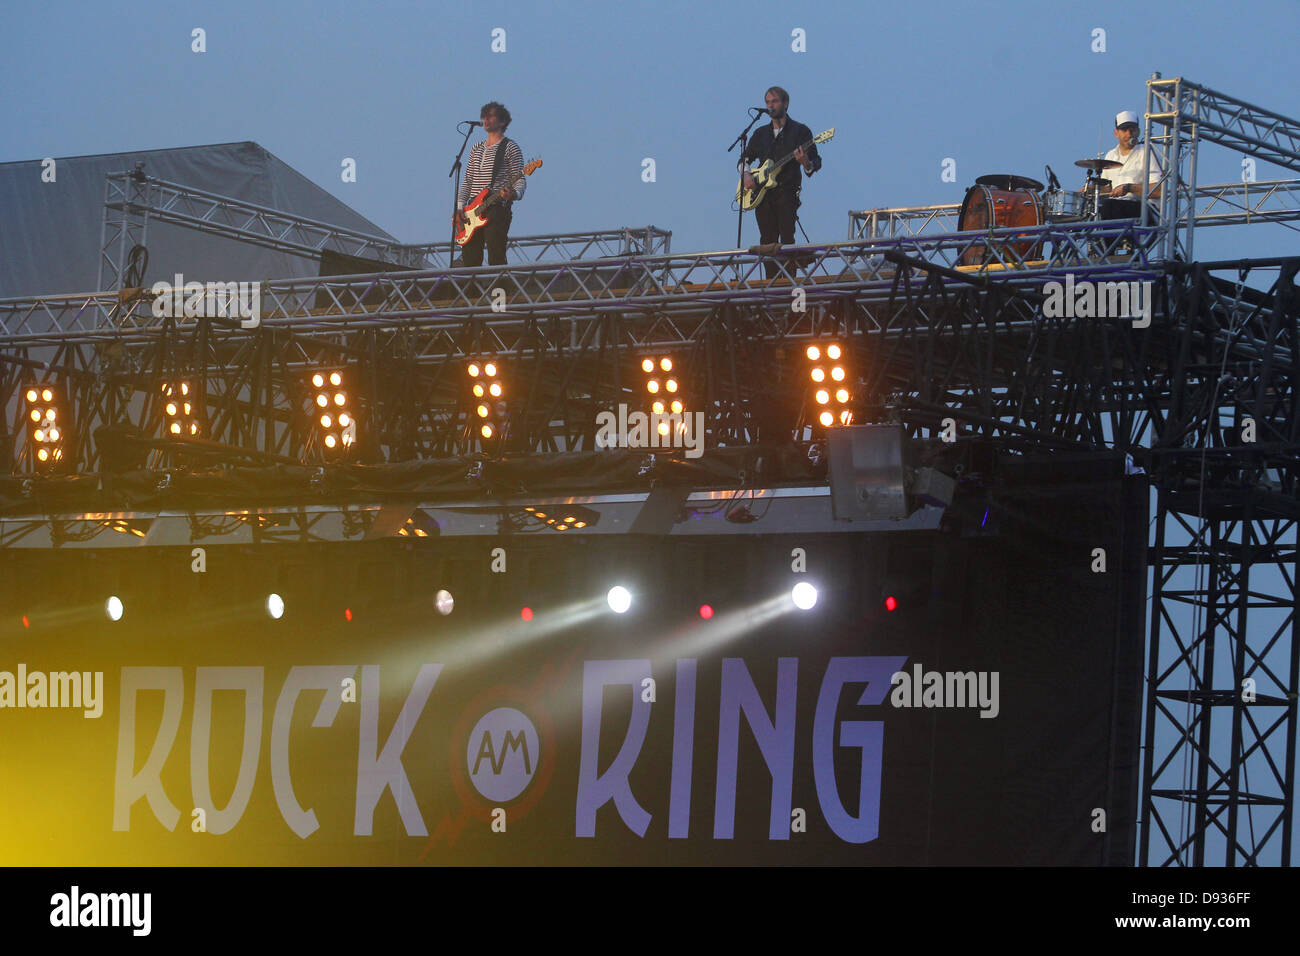 Nuerburg, Germany, 8 June 2013. The German rock band 'Sportfreunde Stiller' performs on the rooftop above the central stage  at the Rock am Ring music festival in Nuerburg, Germany, 9 June 2013. Credit:  dpa picture alliance/Alamy Live News Stock Photo